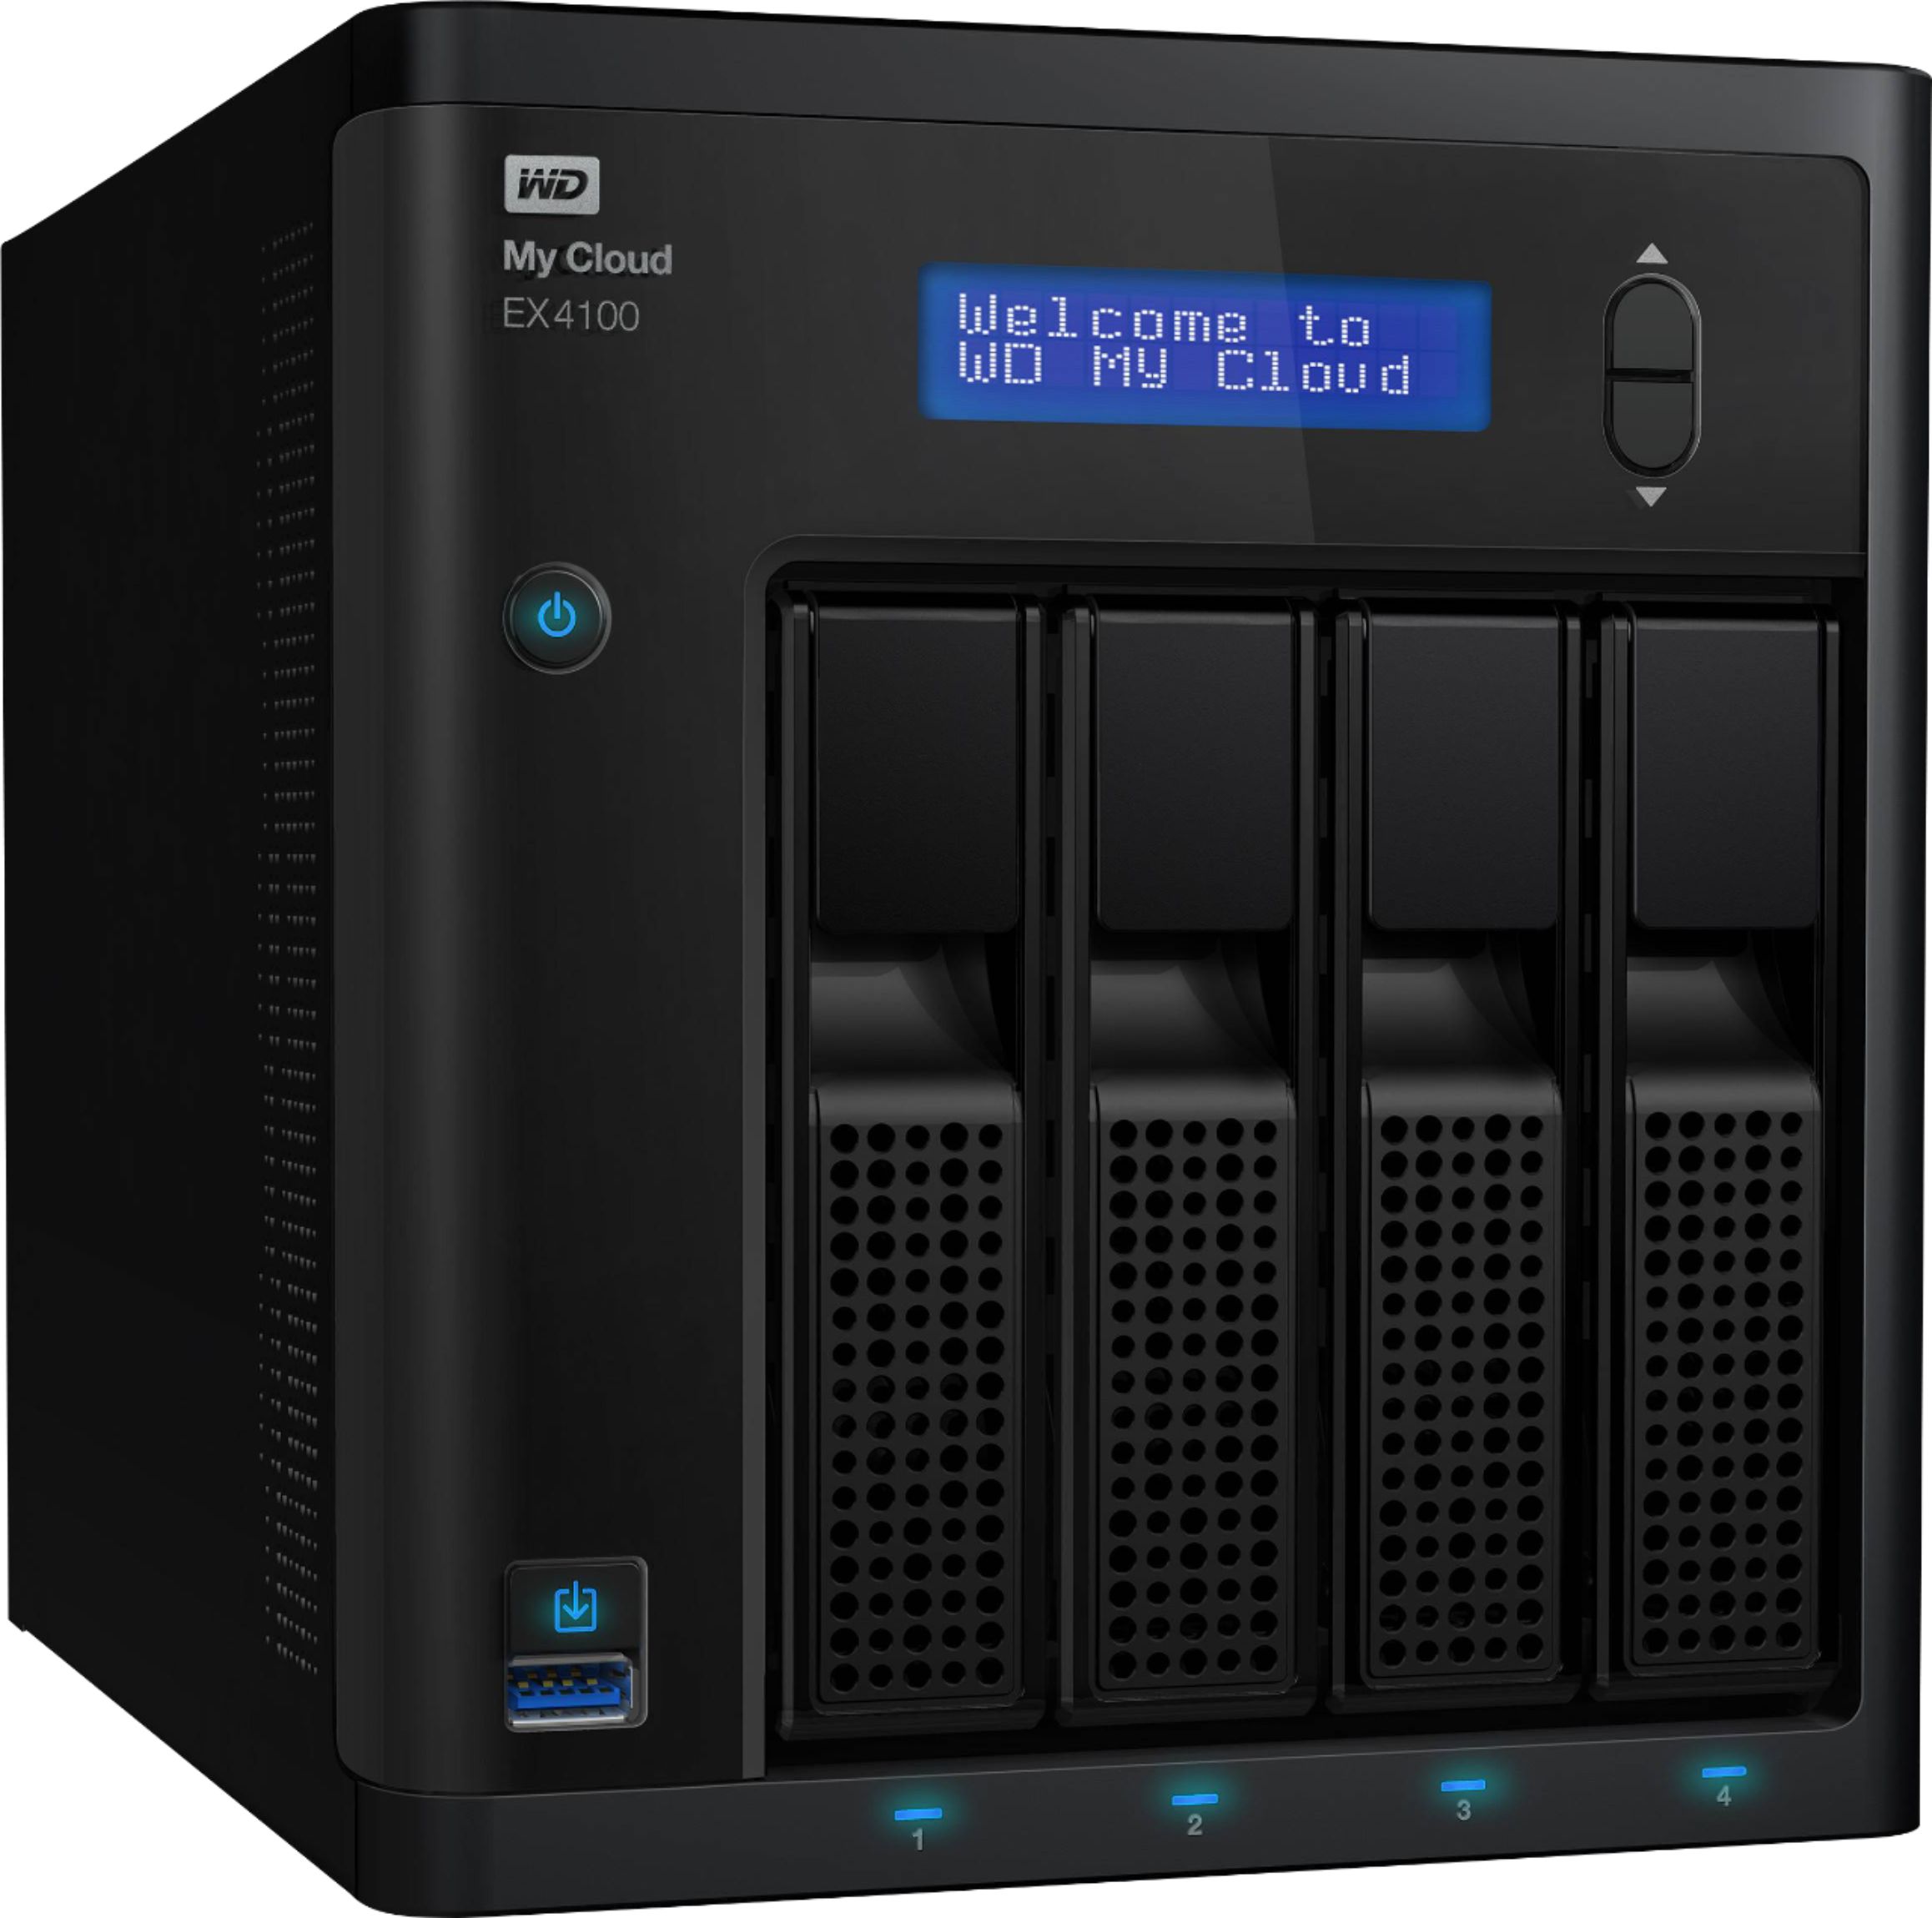 WD My Cloud review: A handy personal cloud solution - Gizbot Reviews